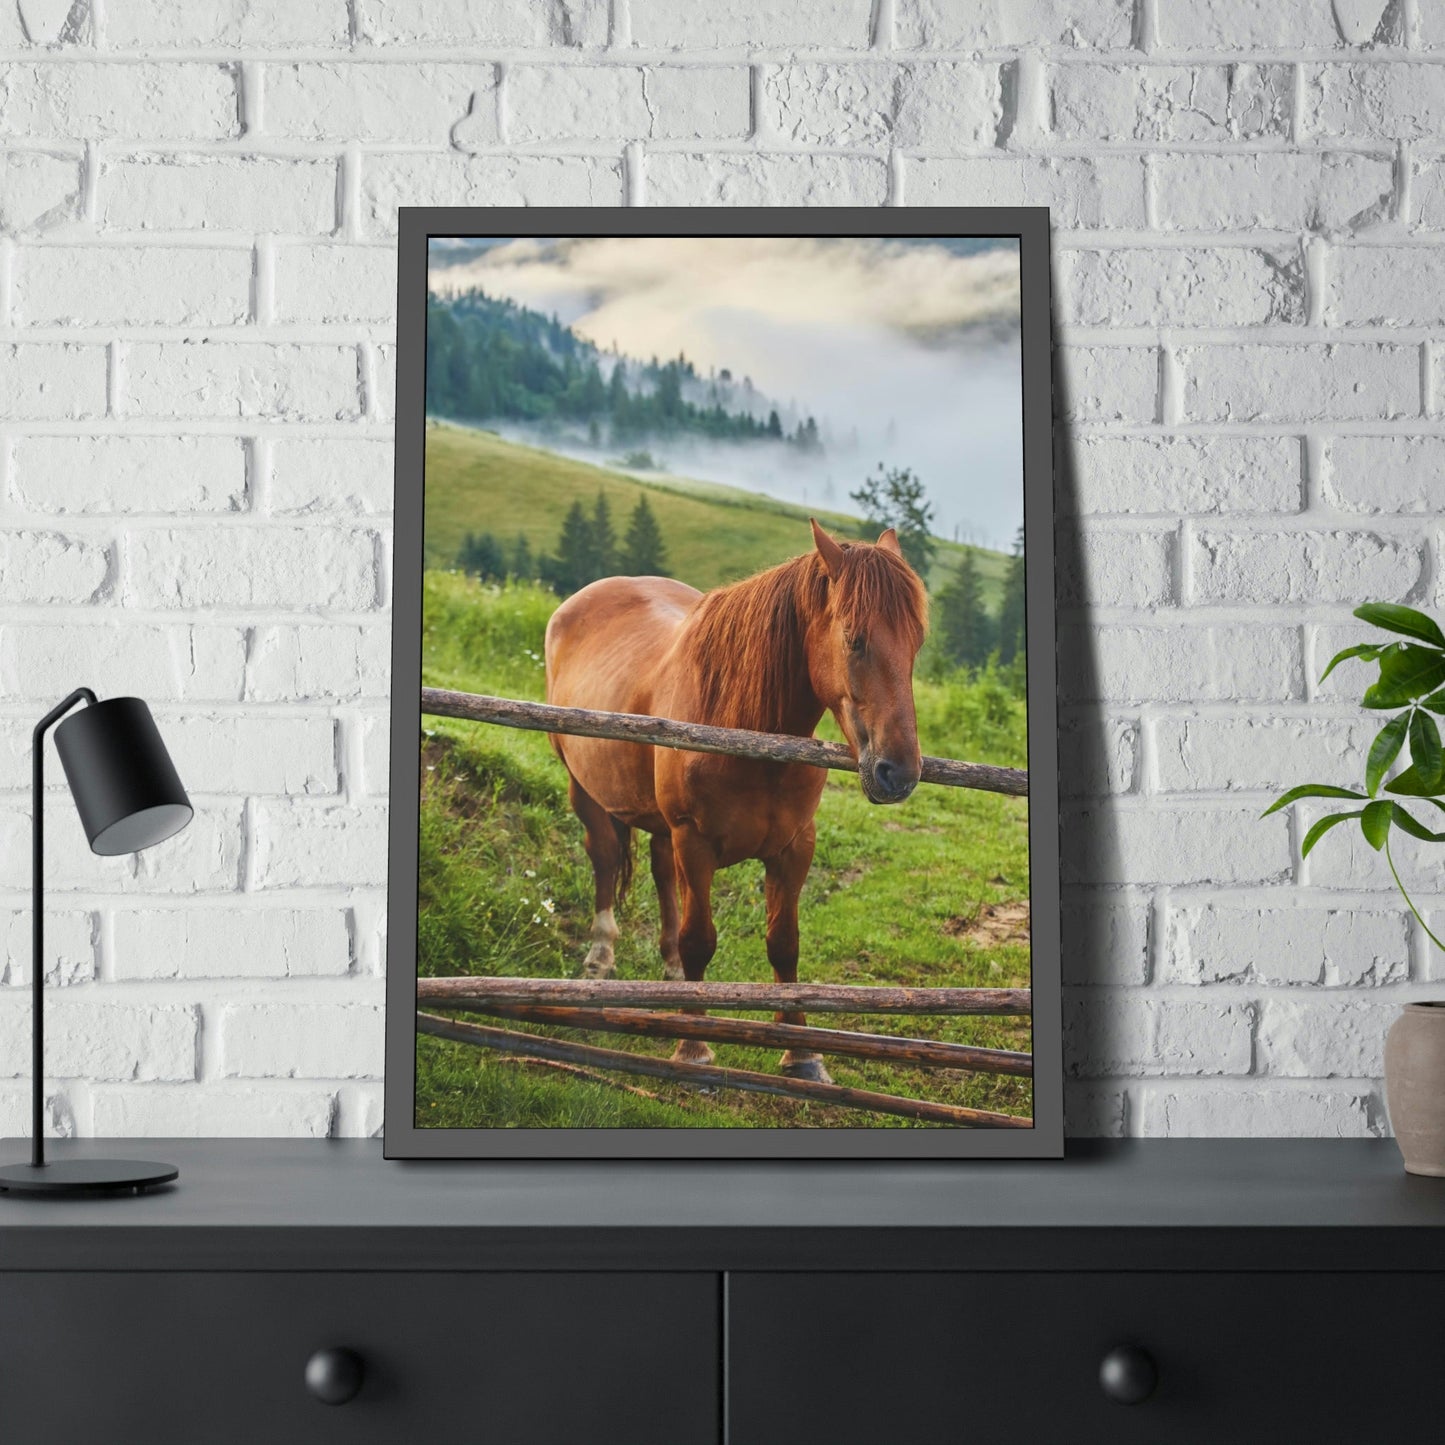 Majestic Horse: A Stunning Animal Painting on Canvas to Adorn Your Wall